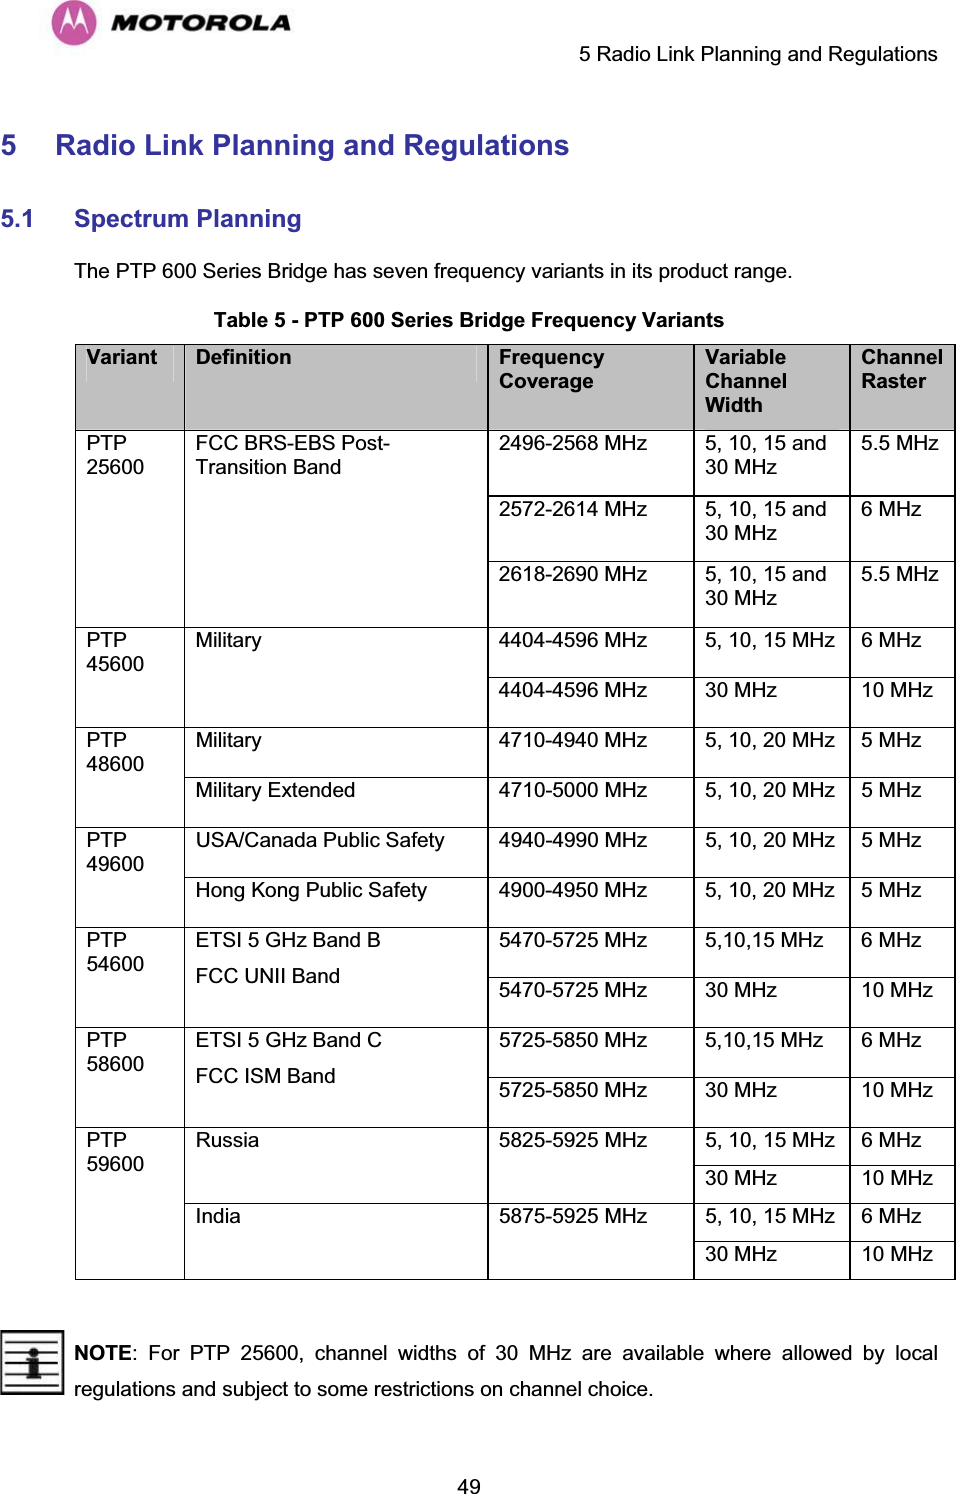     5 Radio Link Planning and Regulations  495 Radio Link Planning and Regulations  5.1 Spectrum PlanningThe PTP 600 Series Bridge has seven frequency variants in its product range.  Table 5 - PTP 600 Series Bridge Frequency Variants Variant Definition  Frequency Coverage VariableChannel WidthChannel Raster 2496-2568 MHz  5, 10, 15 and 30 MHz 5.5 MHz 2572-2614 MHz  5, 10, 15 and 30 MHz 6 MHz PTP 25600 FCC BRS-EBS Post-Transition Band 2618-2690 MHz  5, 10, 15 and 30 MHz 5.5 MHz 4404-4596 MHz  5, 10, 15 MHz  6 MHz PTP 45600 Military 4404-4596 MHz  30 MHz  10 MHz Military  4710-4940 MHz  5, 10, 20 MHz  5 MHz PTP 48600 Military Extended  4710-5000 MHz  5, 10, 20 MHz  5 MHz USA/Canada Public Safety  4940-4990 MHz  5, 10, 20 MHz  5 MHz PTP 49600 Hong Kong Public Safety  4900-4950 MHz  5, 10, 20 MHz  5 MHz 5470-5725 MHz  5,10,15 MHz   6 MHz PTP 54600 ETSI 5 GHz Band B FCC UNII Band  5470-5725 MHz  30 MHz  10 MHz 5725-5850 MHz  5,10,15 MHz  6 MHz PTP 58600 ETSI 5 GHz Band C FCC ISM Band  5725-5850 MHz  30 MHz  10 MHz 5, 10, 15 MHz  6 MHz Russia 5825-5925 MHz 30 MHz  10 MHz 5, 10, 15 MHz  6 MHz PTP 59600 India 5875-5925 MHz 30 MHz  10 MHz NOTE: For PTP 25600, channel widths of 30 MHz are available where allowed by local regulations and subject to some restrictions on channel choice.